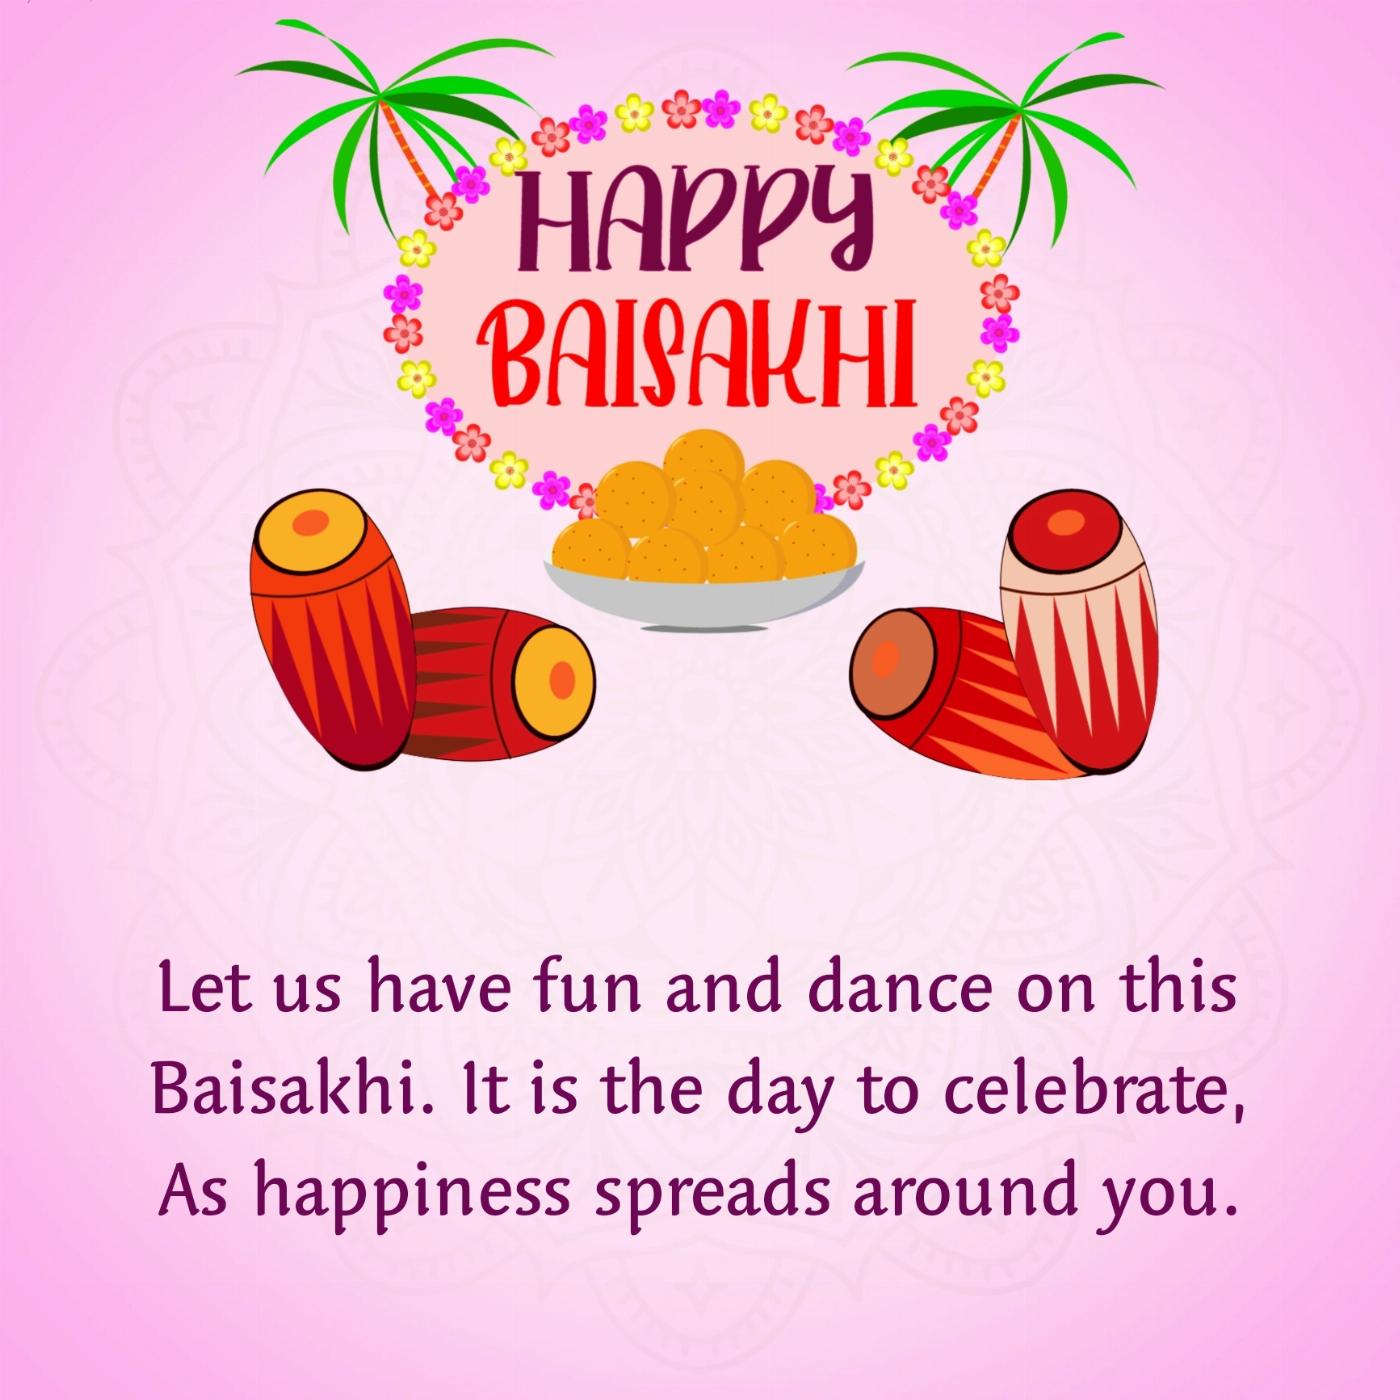 Let us have fun and dance on this Baisakhi